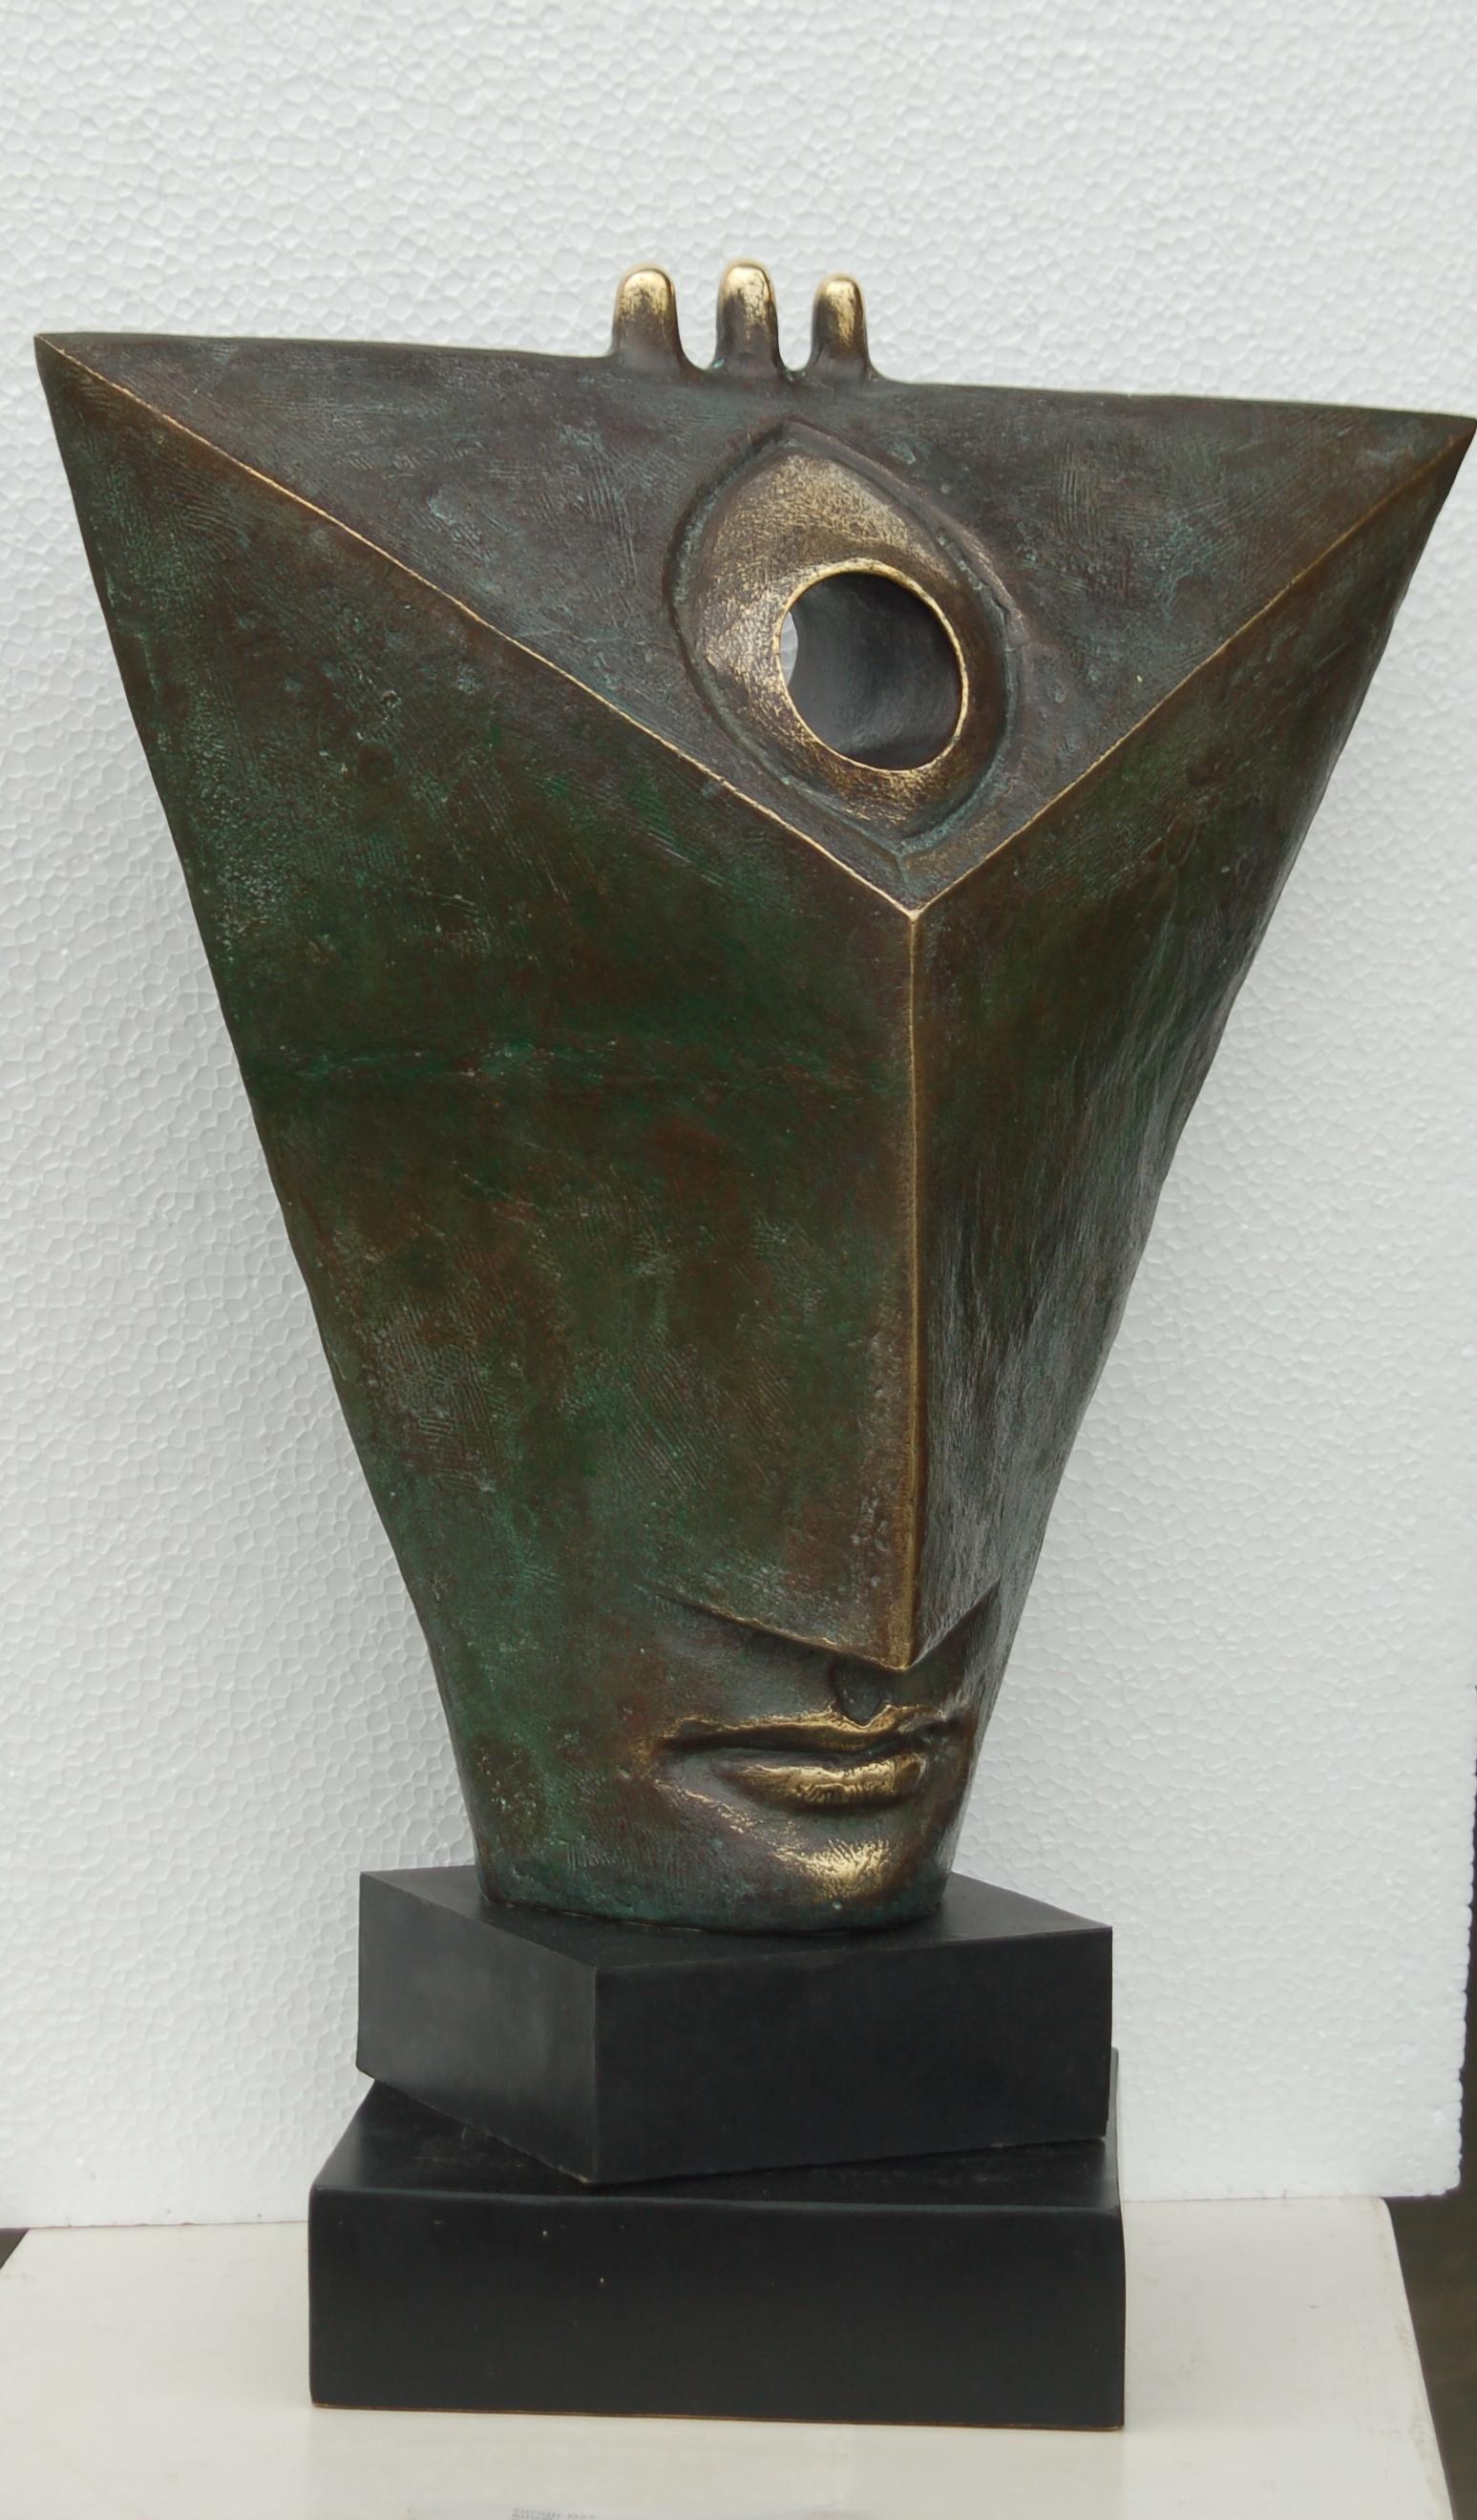 Pradip Mondal Abstract Sculpture - The Third Eye, Power of the Myth, Indian Goddess with Three eyes, IndianSculpture